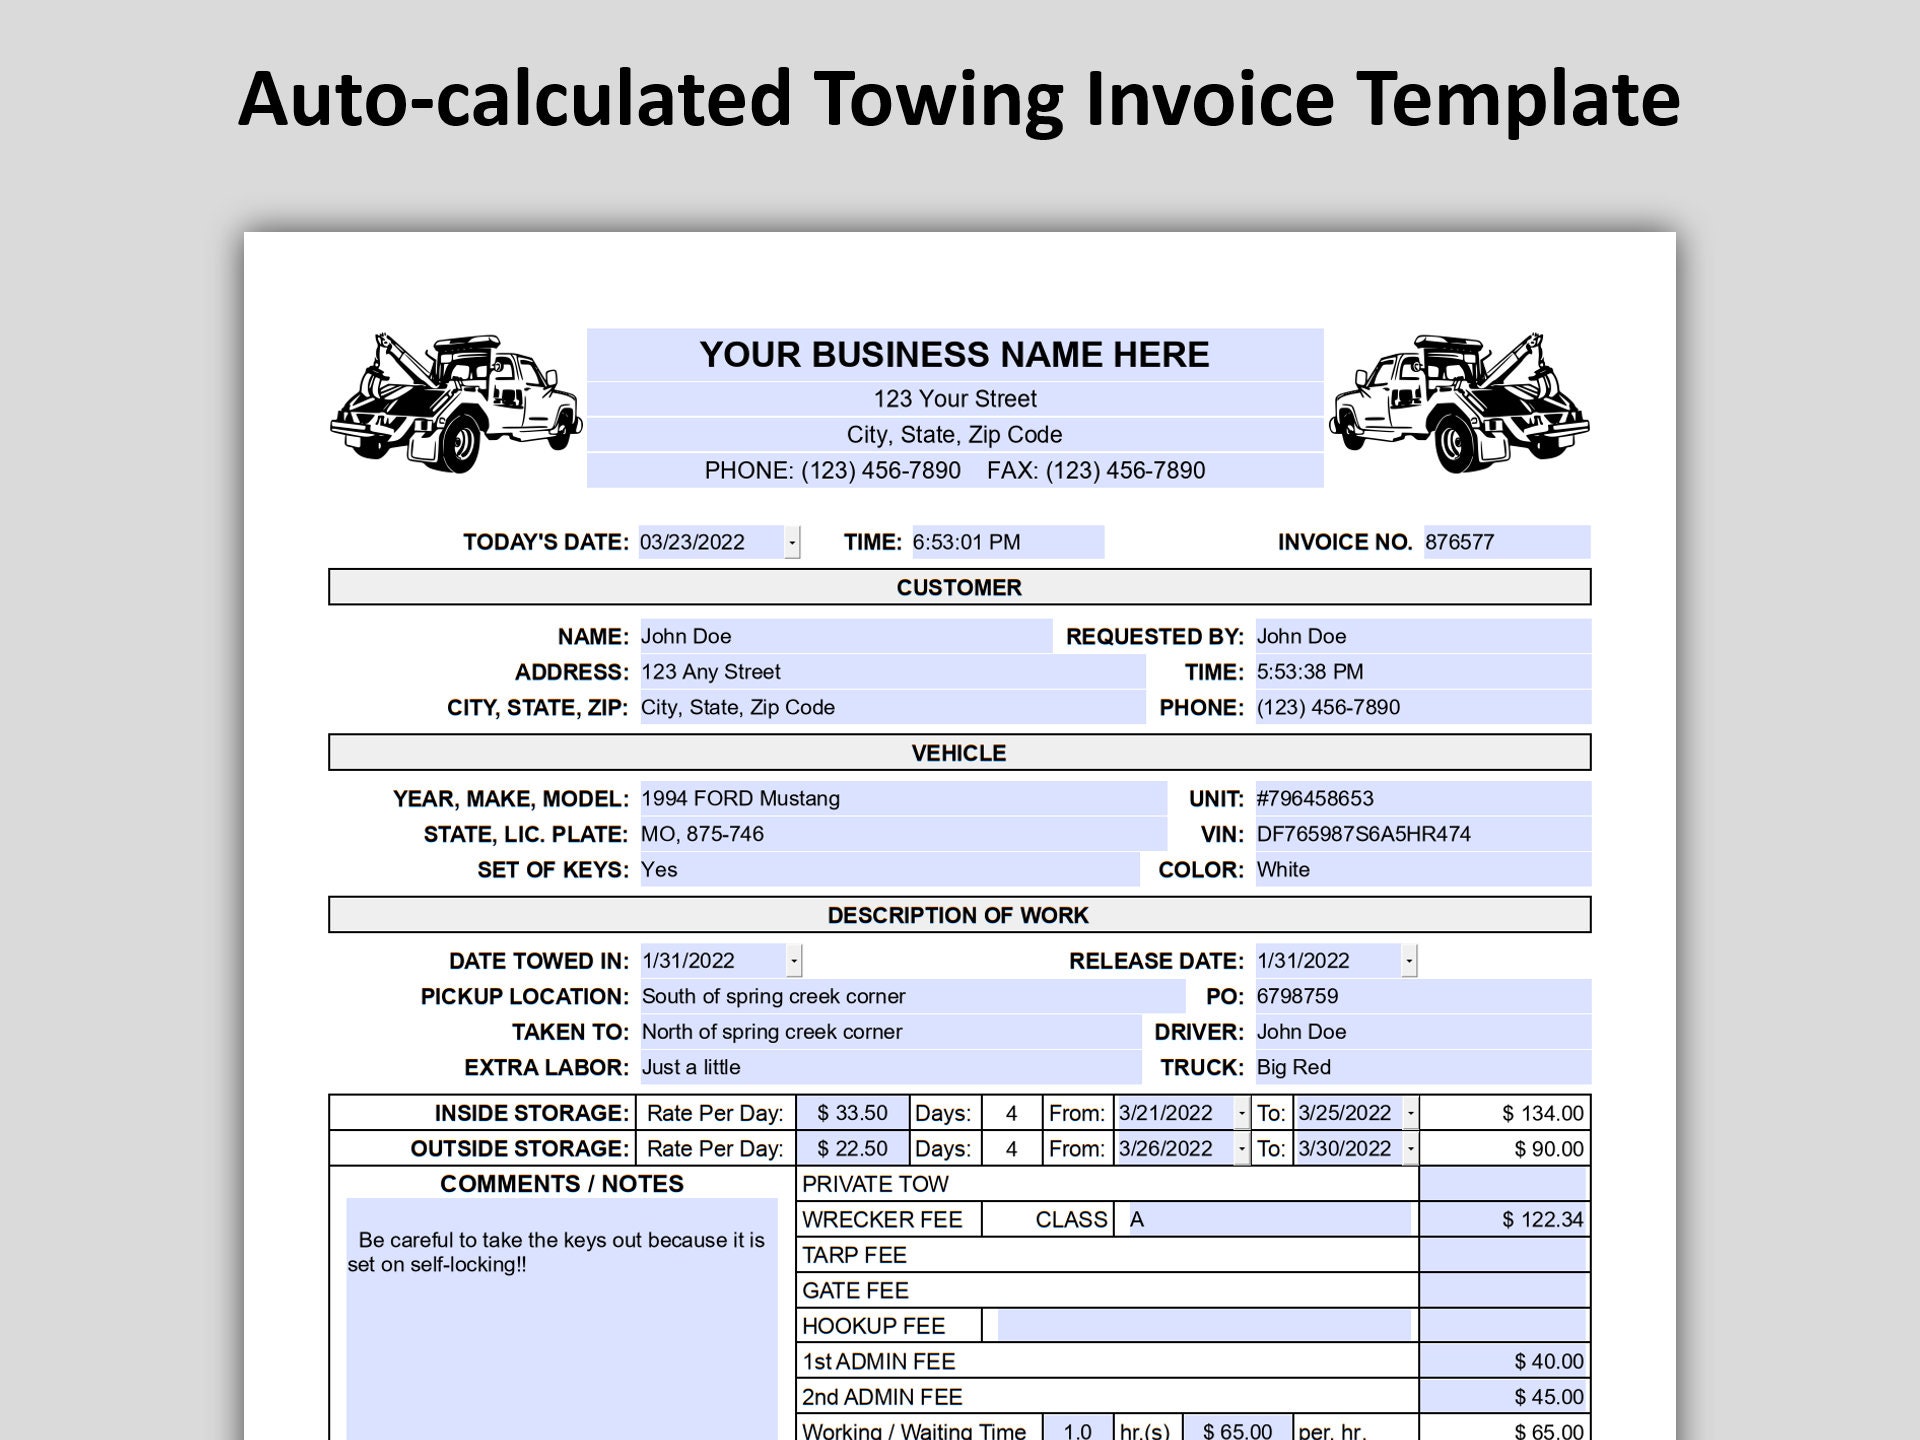 towing-invoice-template-alejandro-assassinations